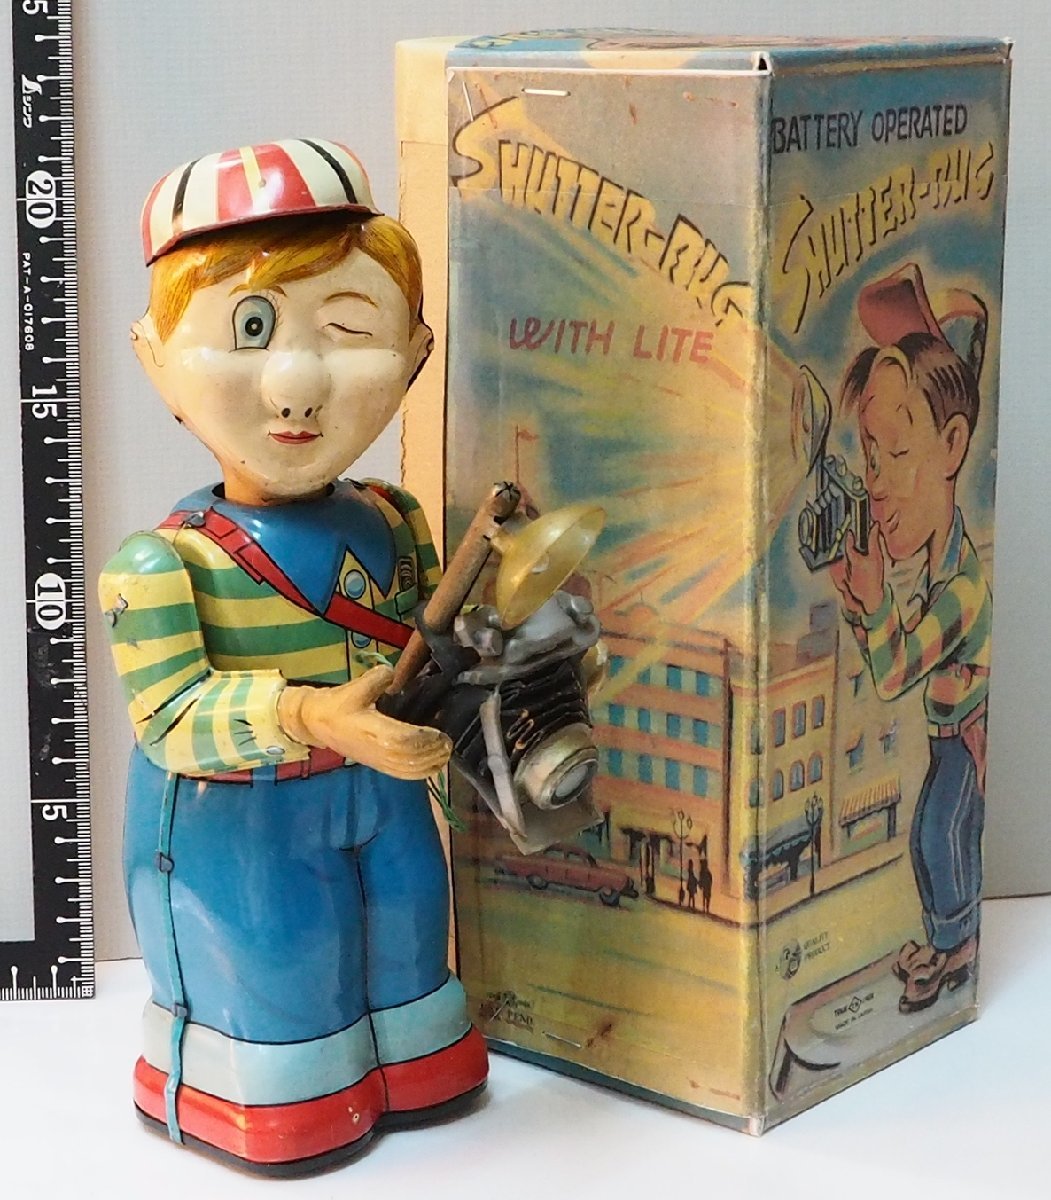 .. toy [SHUTTER-BUG shutter bag camera small . boy operation defect ] that time thing tin plate made doll TIN TOY#TNno blur [ box is copy ]0557